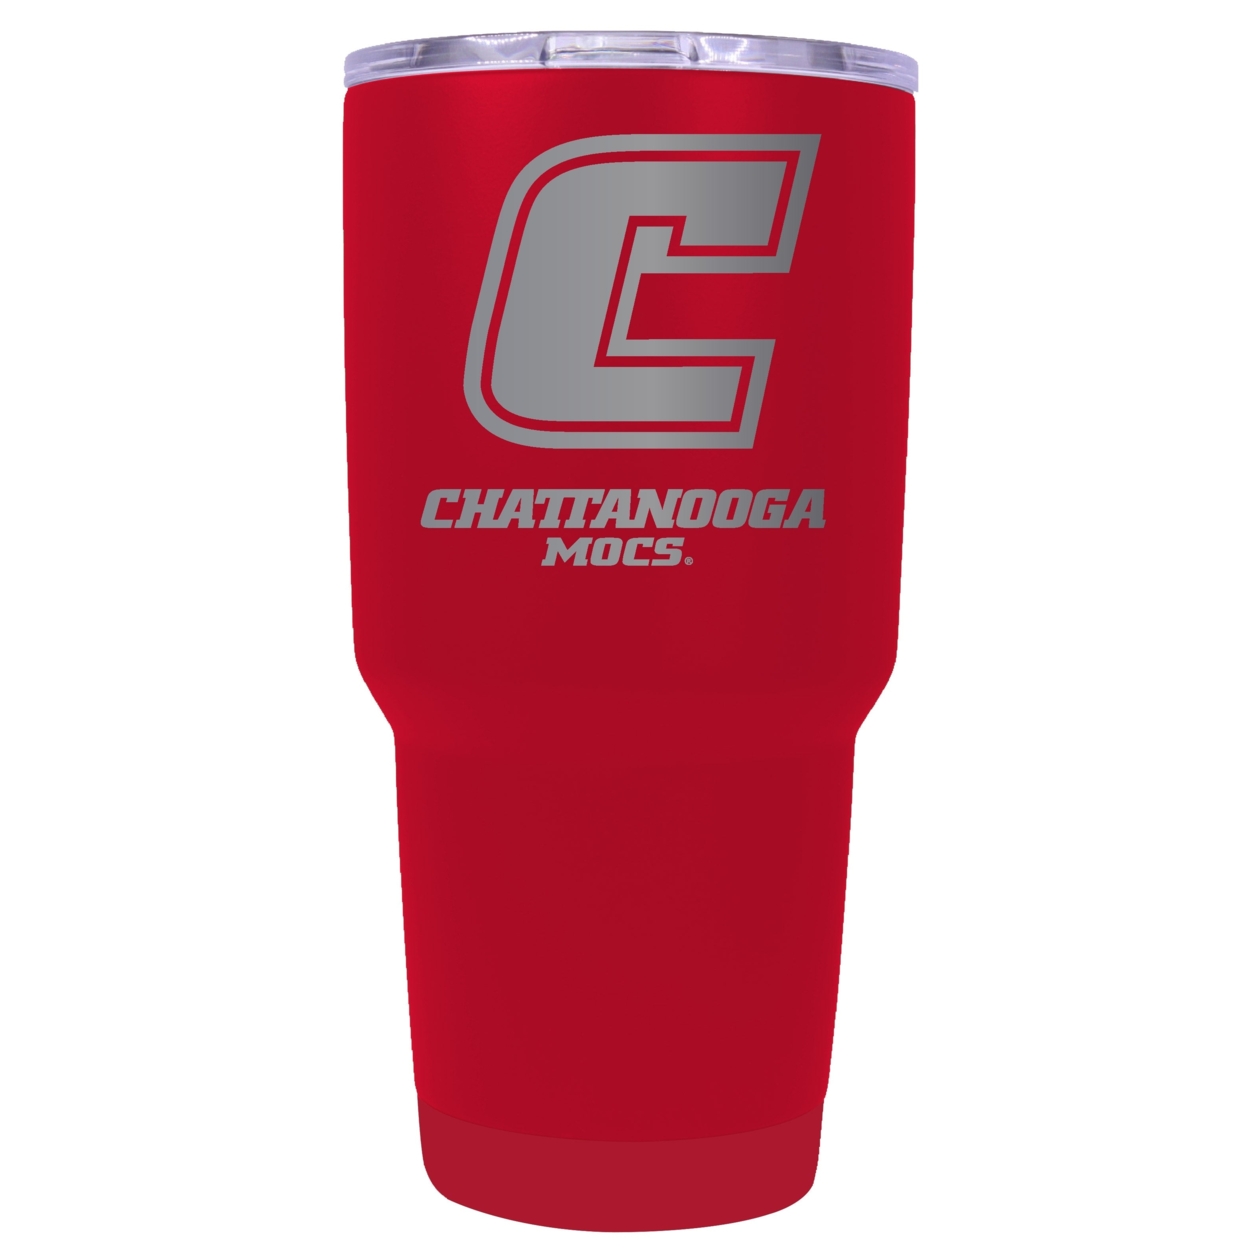 University Of Tennessee At Chattanooga 24 Oz Laser Engraved Stainless Steel Insulated Tumbler - Choose Your Color. - Navy